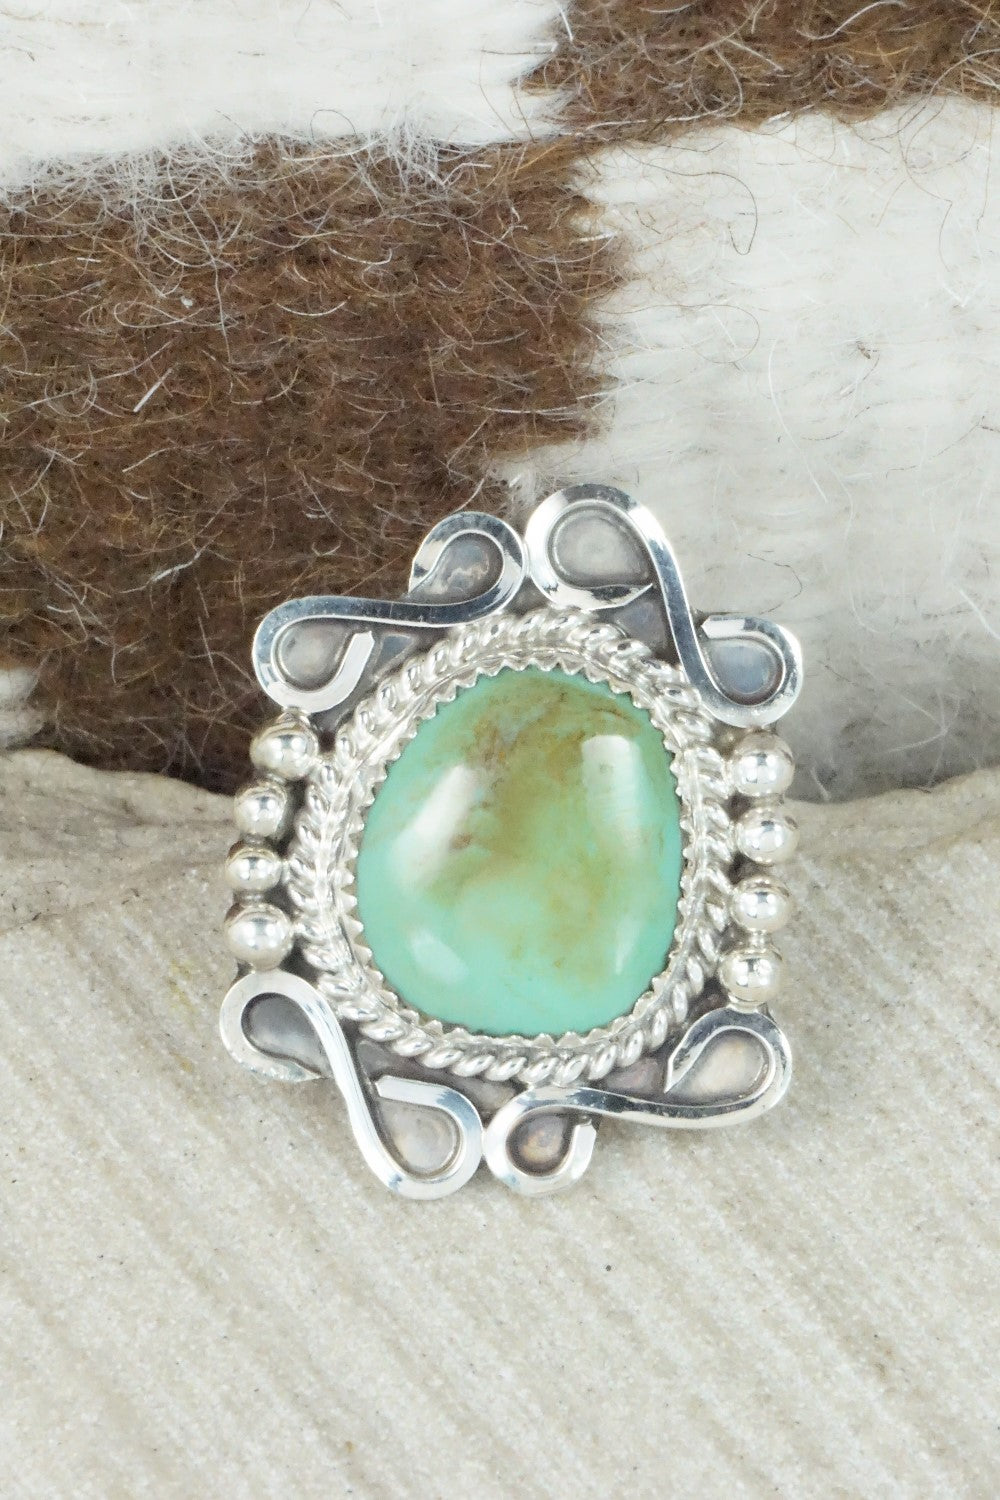 Turquoise & Sterling Silver Ring - DeAnna Nez - Size 5.75